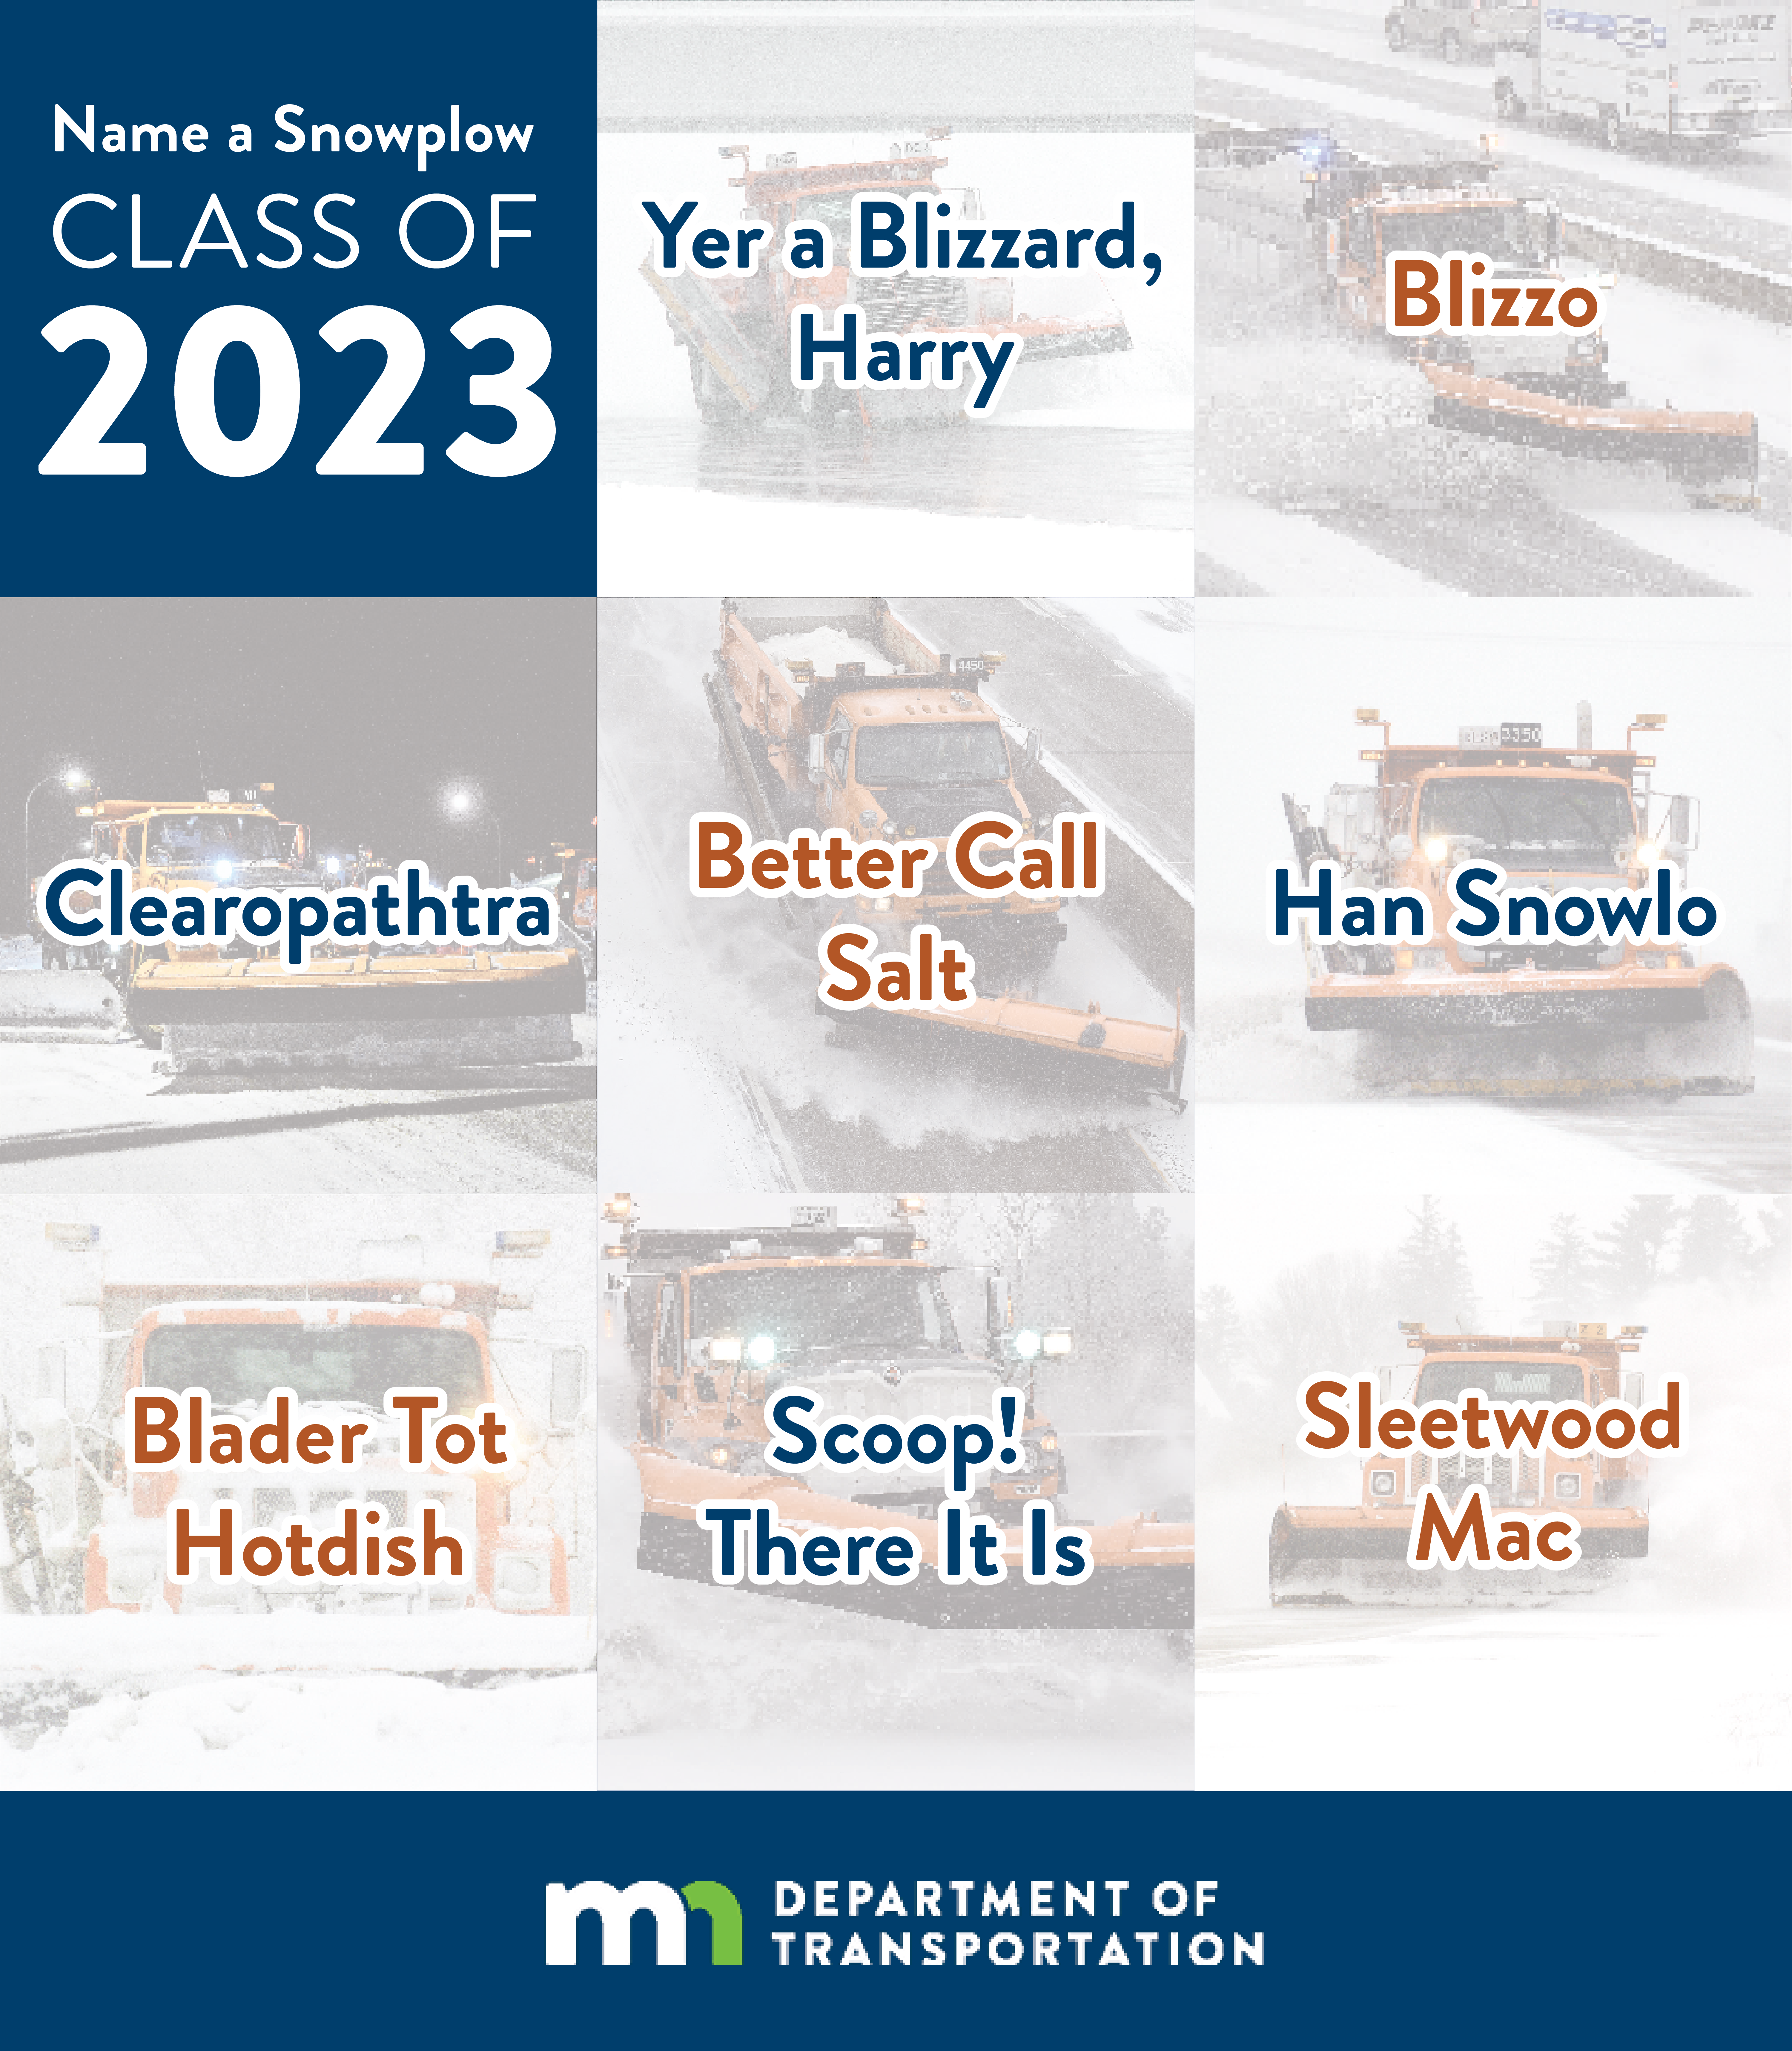 Name a Snowplow Class of 2023: Yer a Blizzard, Harry; Blizzo; Clearopathtra; Better Call Salt; Han Snowlo; Blader Tot Hotdish; Scoop! There It Is; Sleetwood Mac